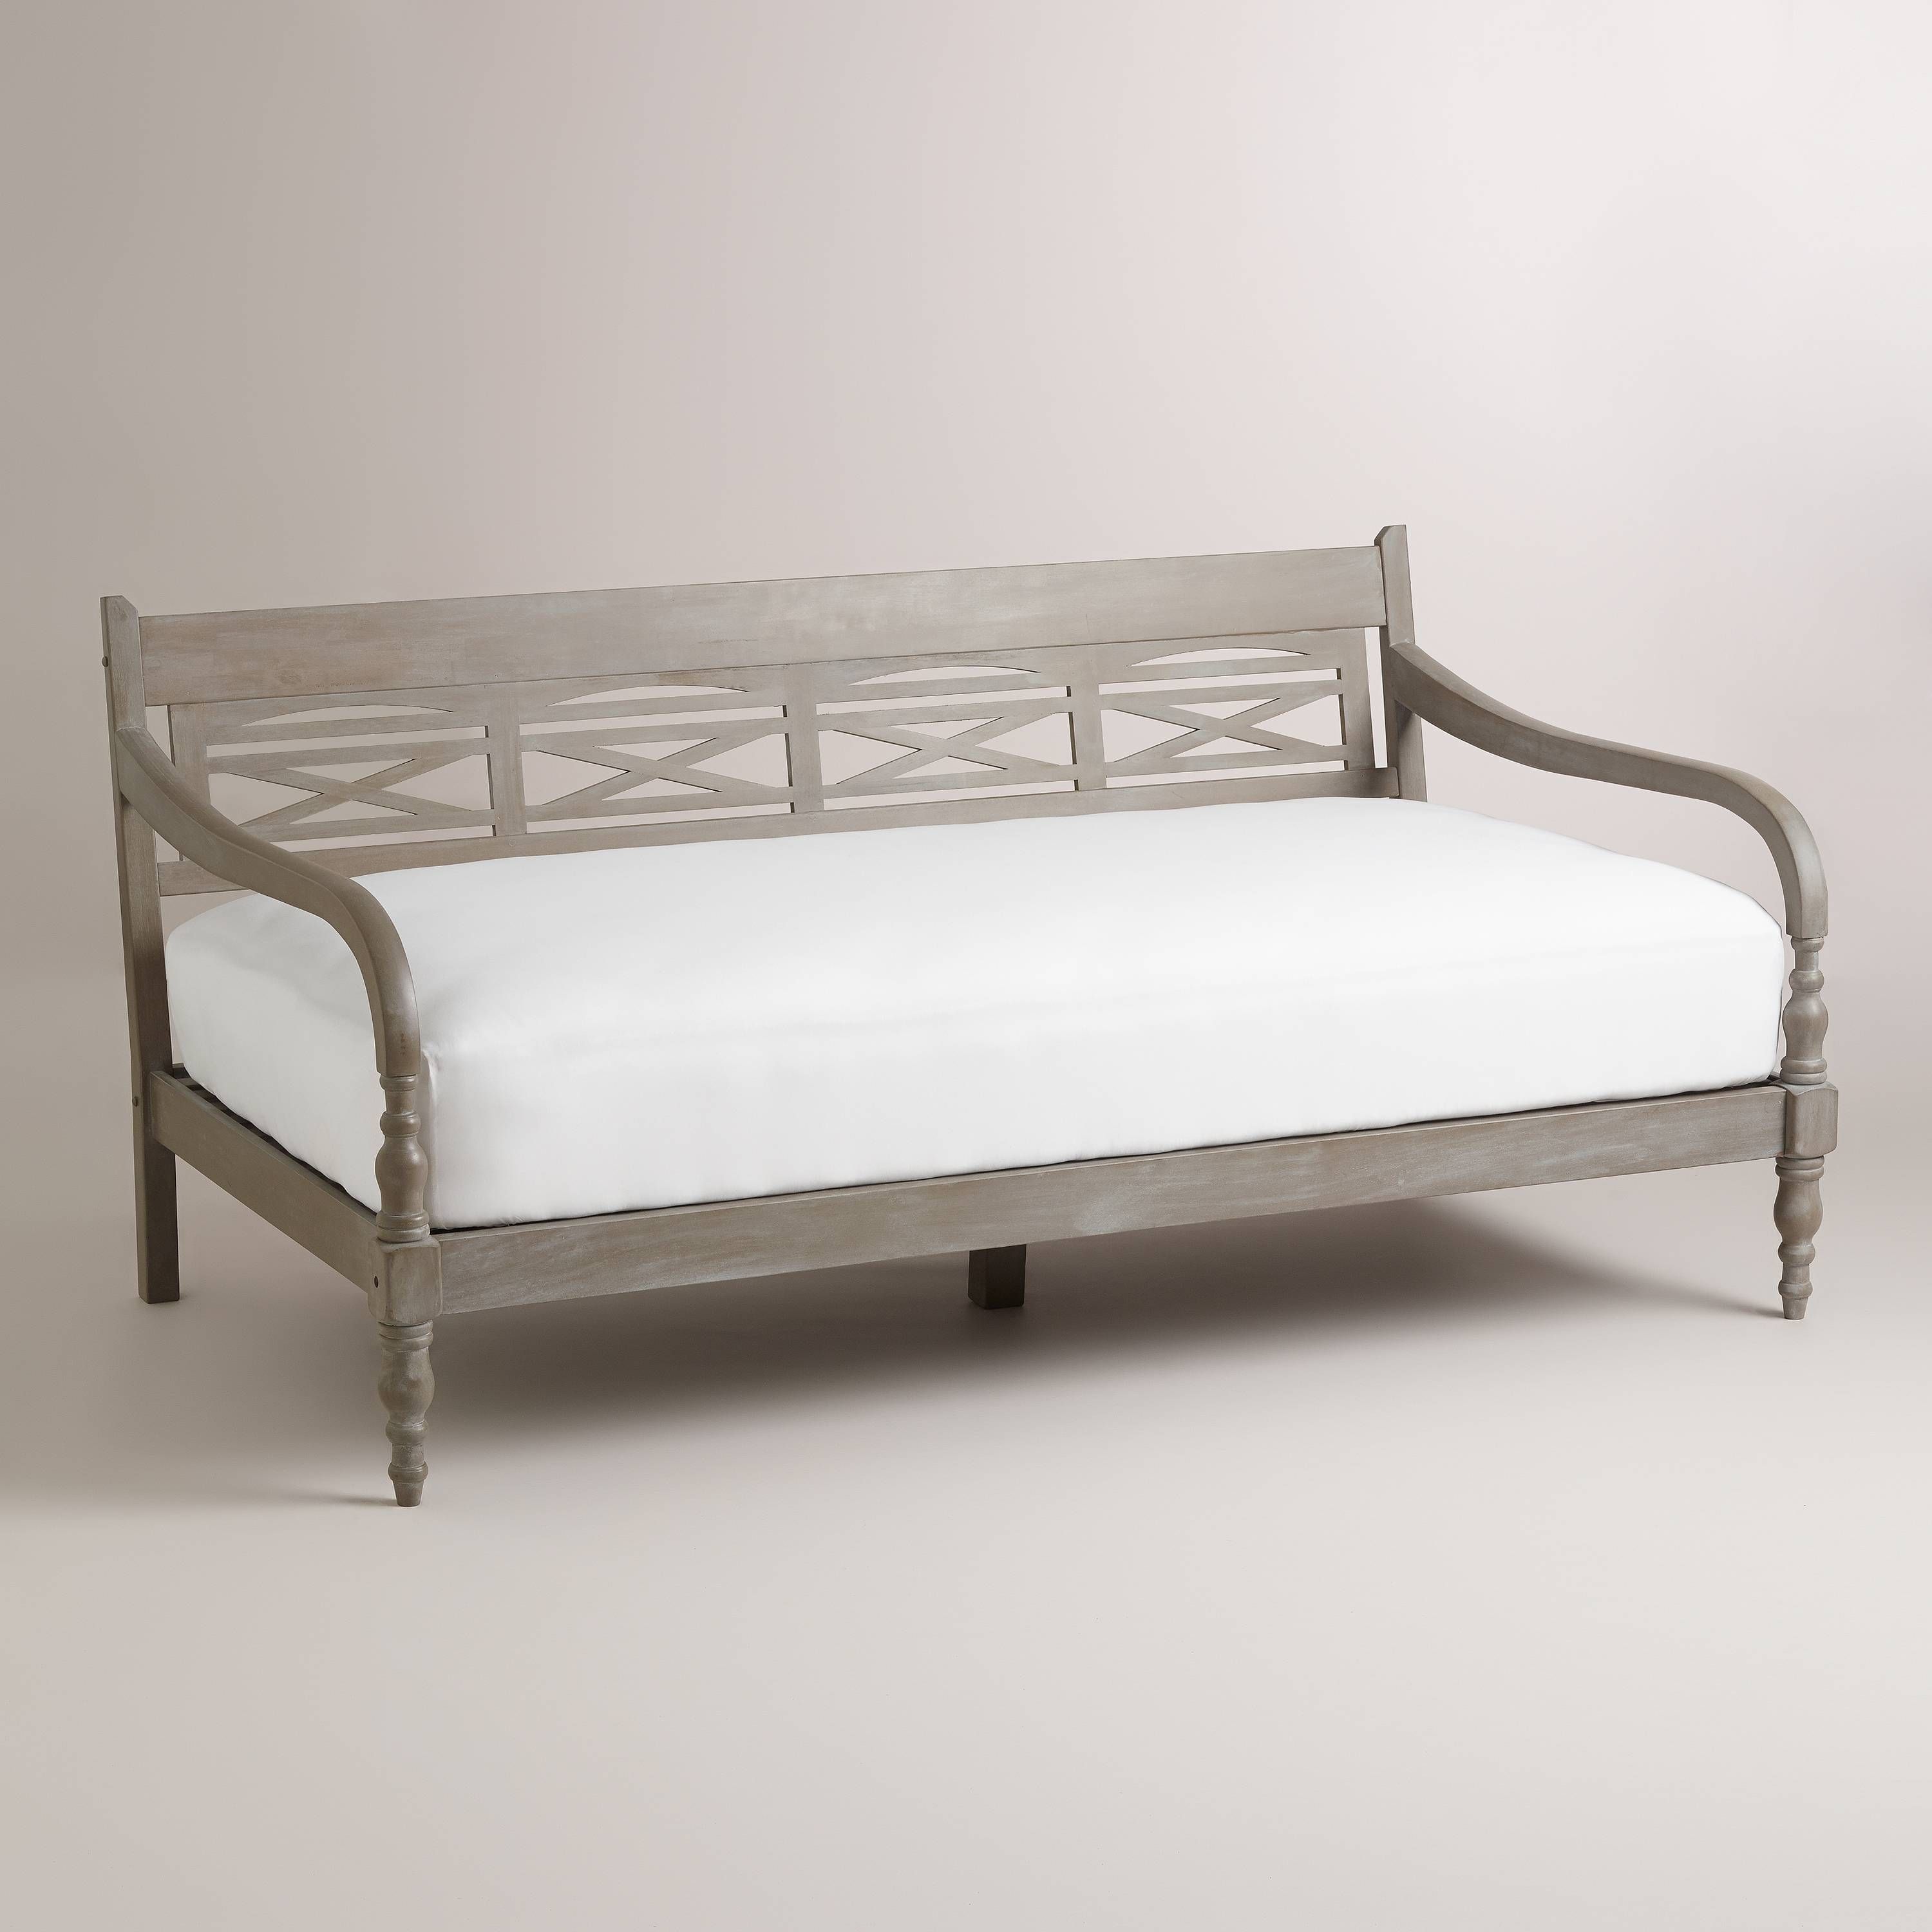 Indonesian Daybed Frame | World Market With Sofa Day Beds (View 10 of 30)